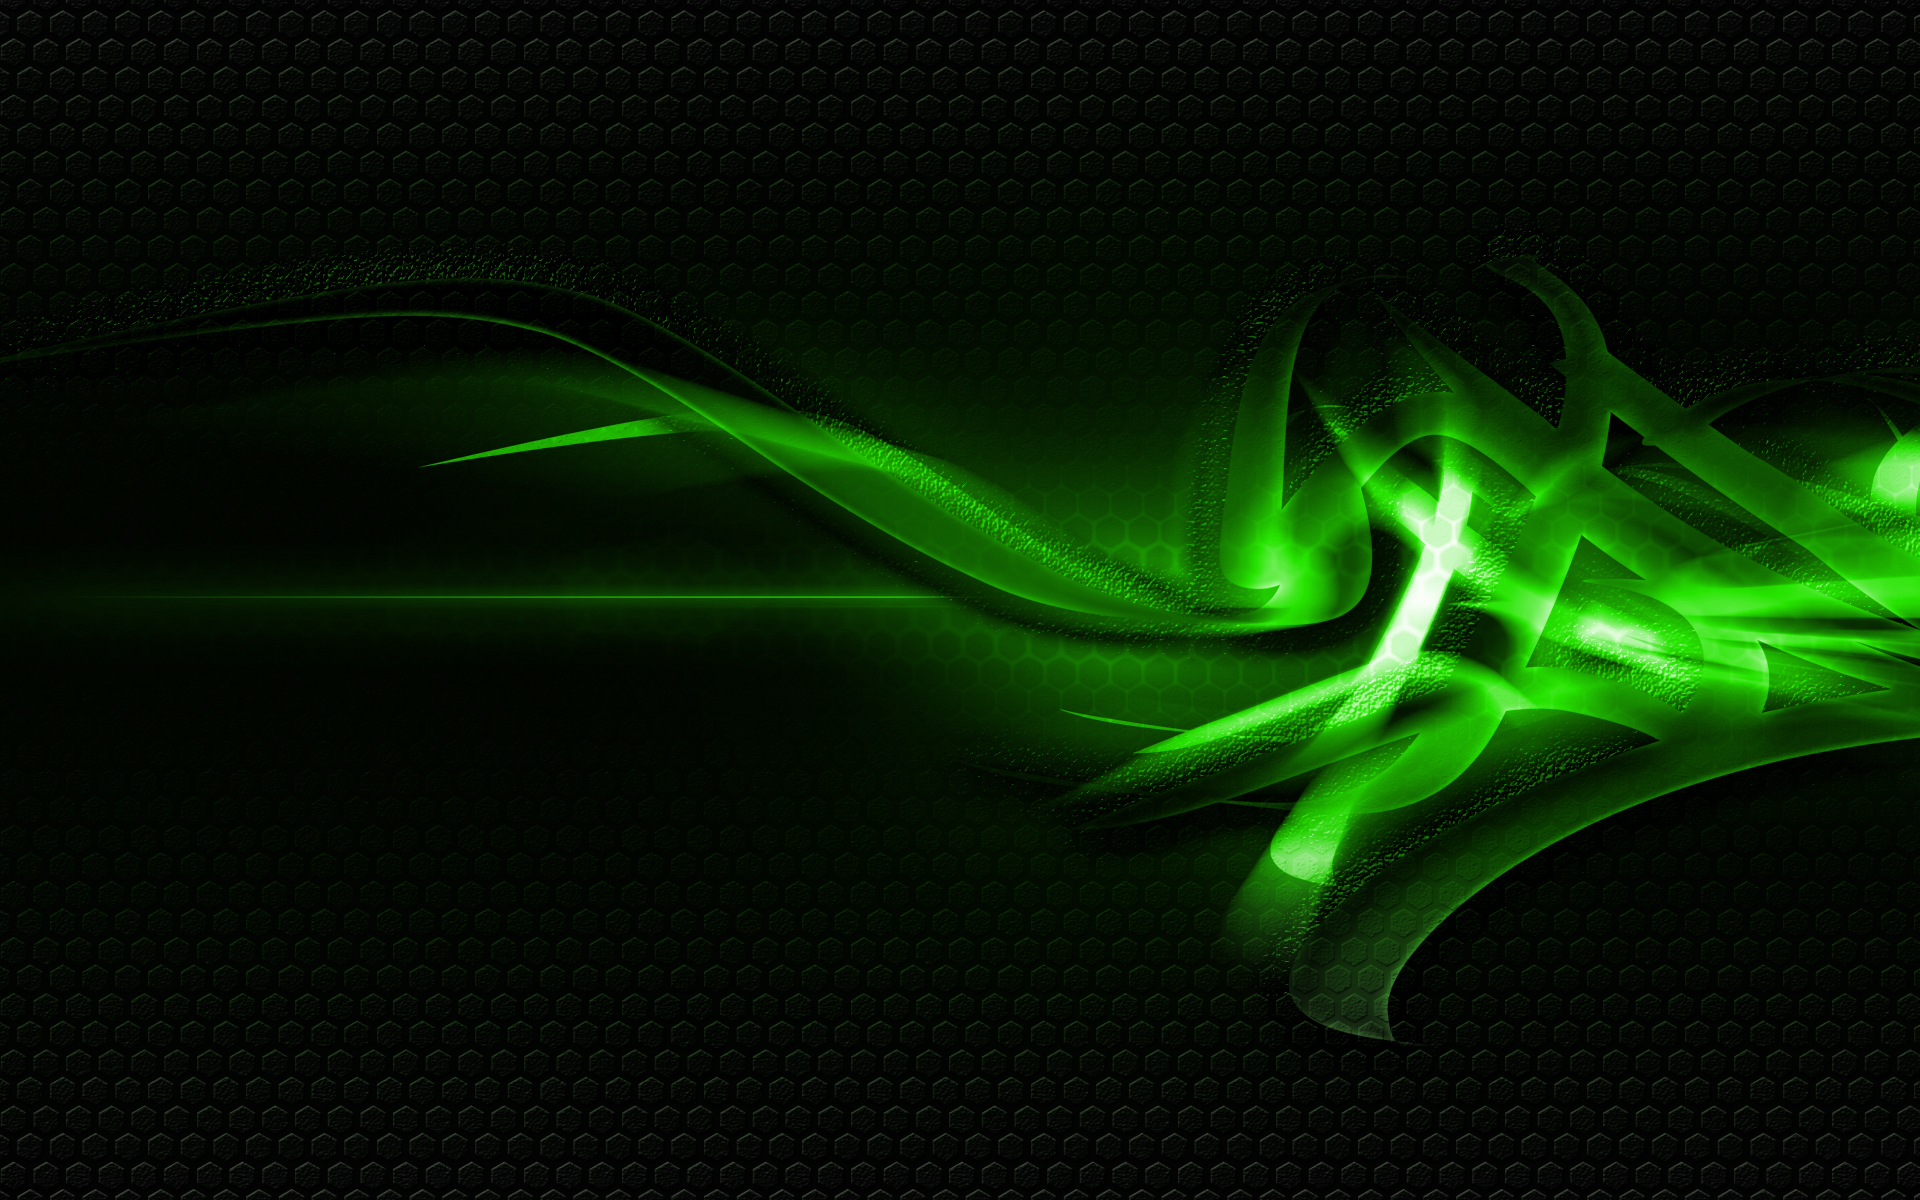 cool bright green background